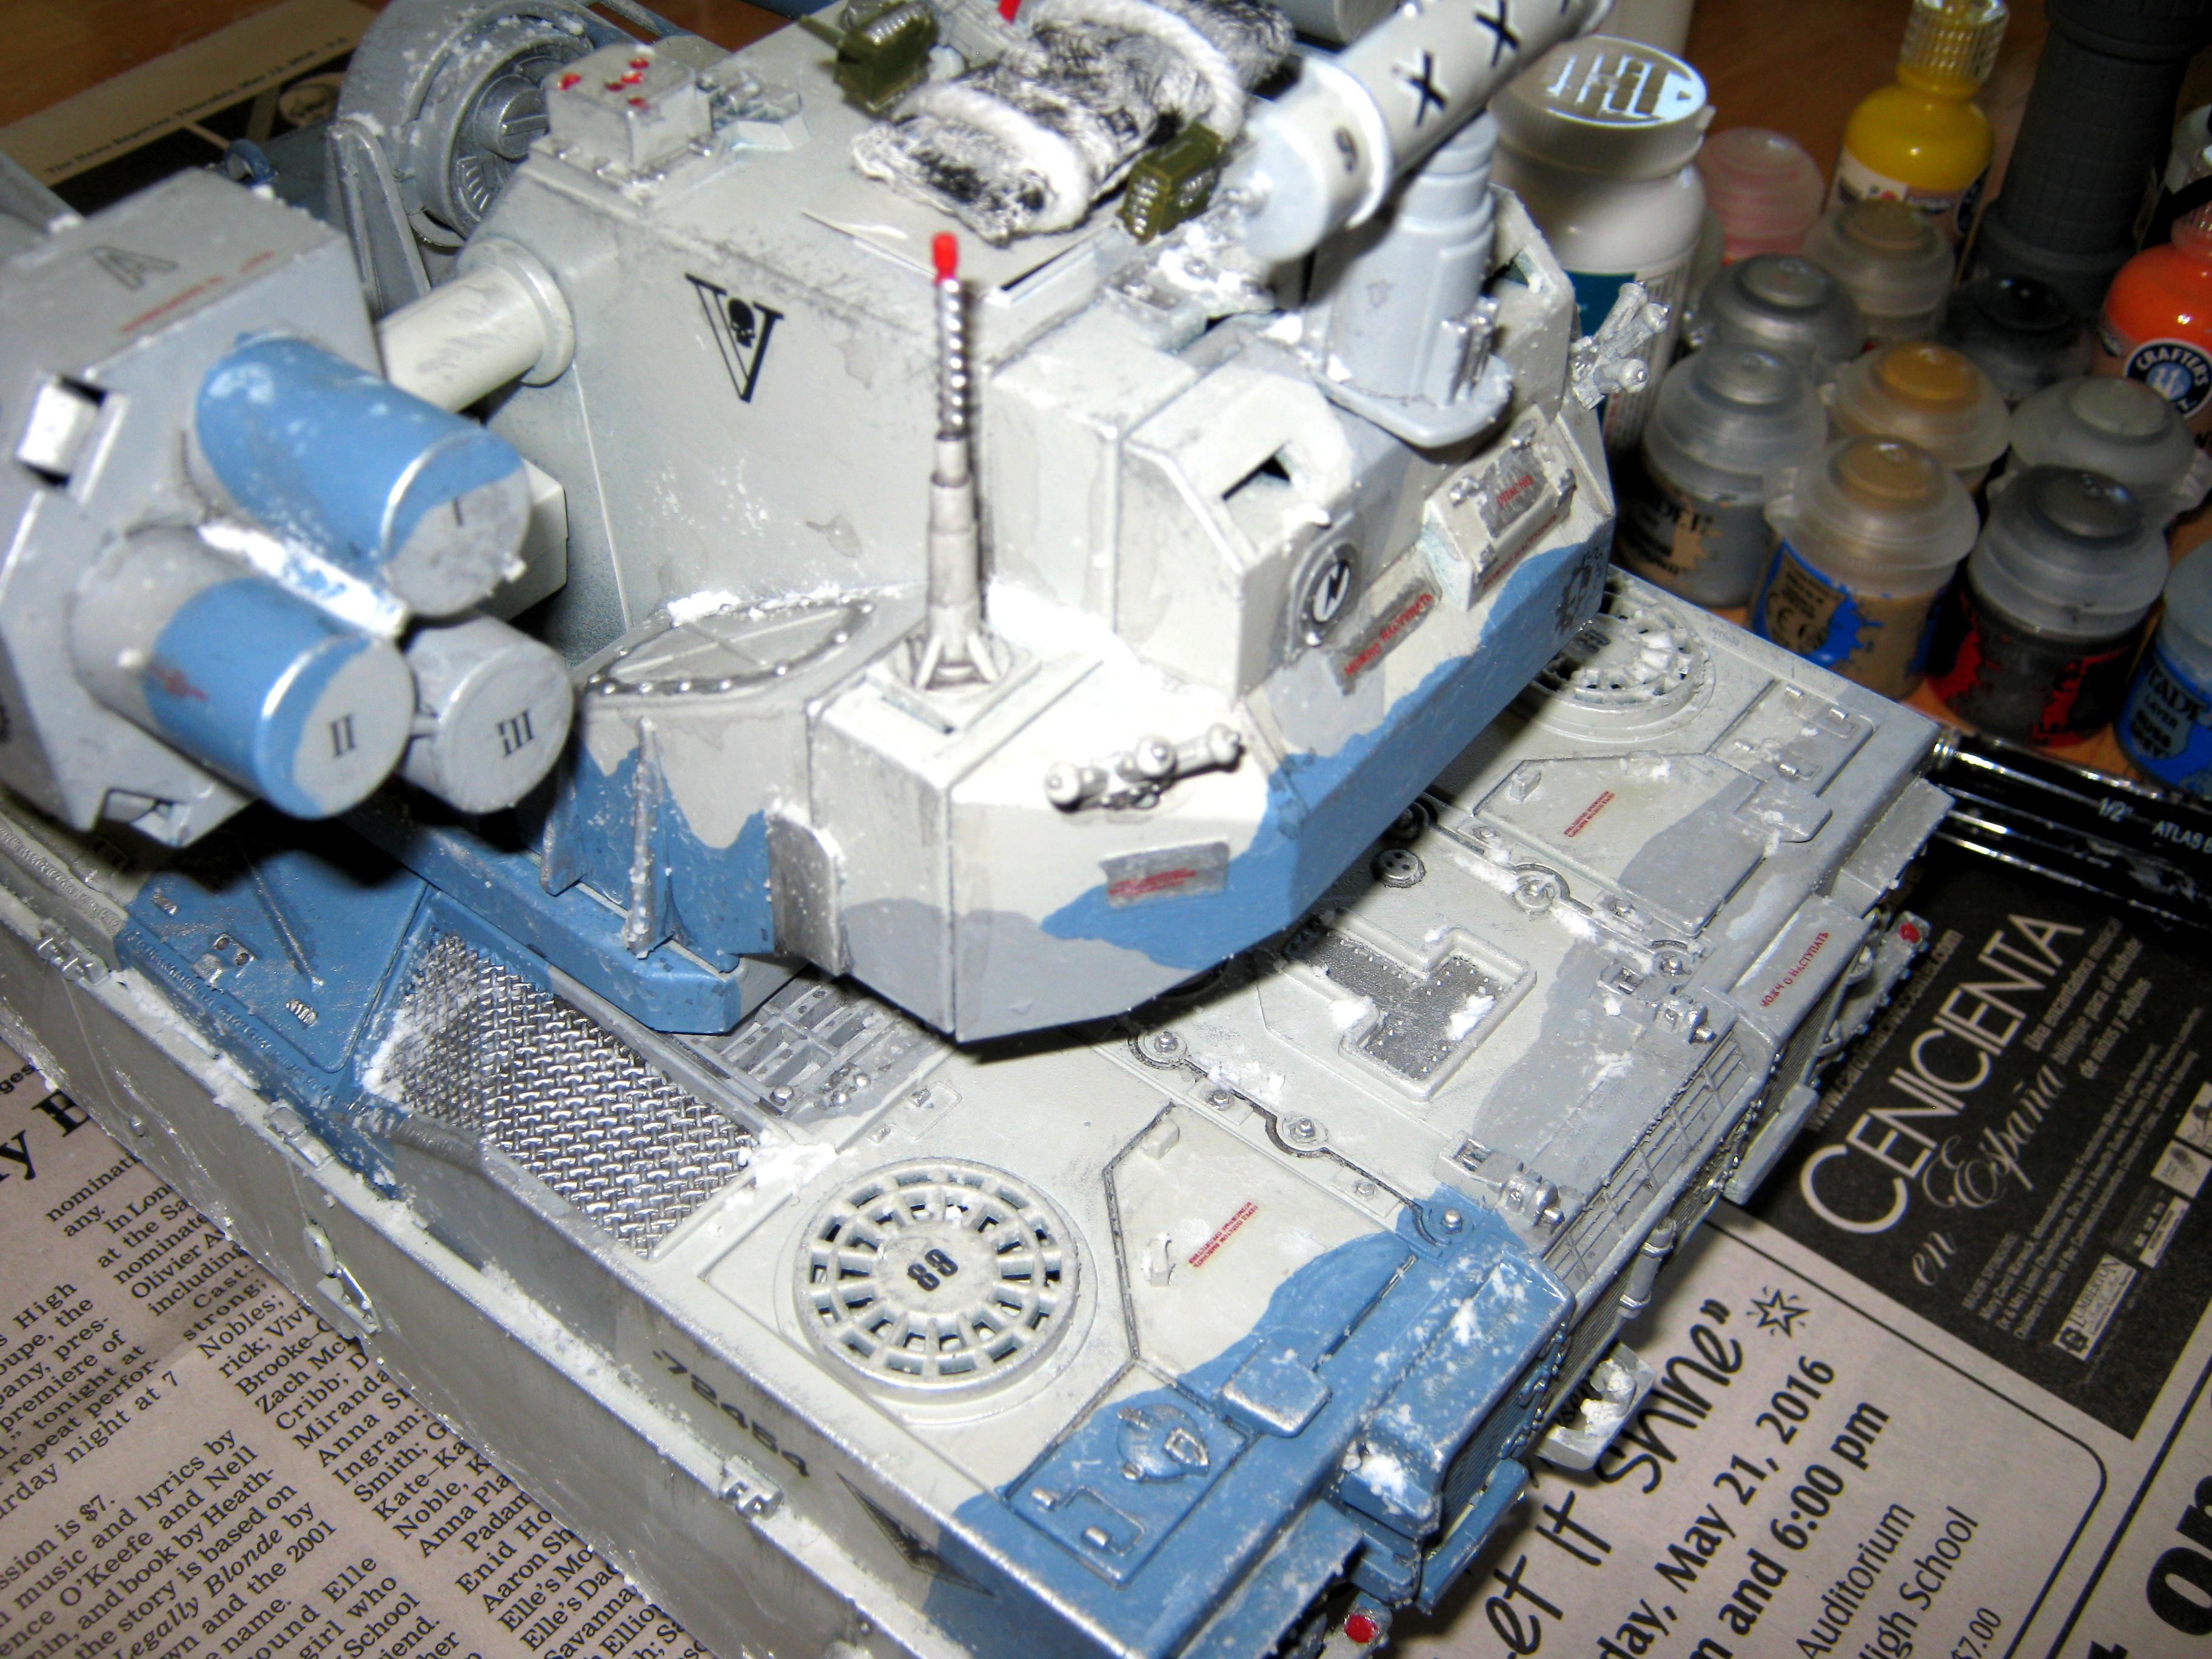 Adv, Afv, Air Defense Vehicle, Anti-aircraft, Artillery, Conversion, Equalizer, G.i. Joe, Imperial, Self-propelled, Super-heavy, Tank, Toy